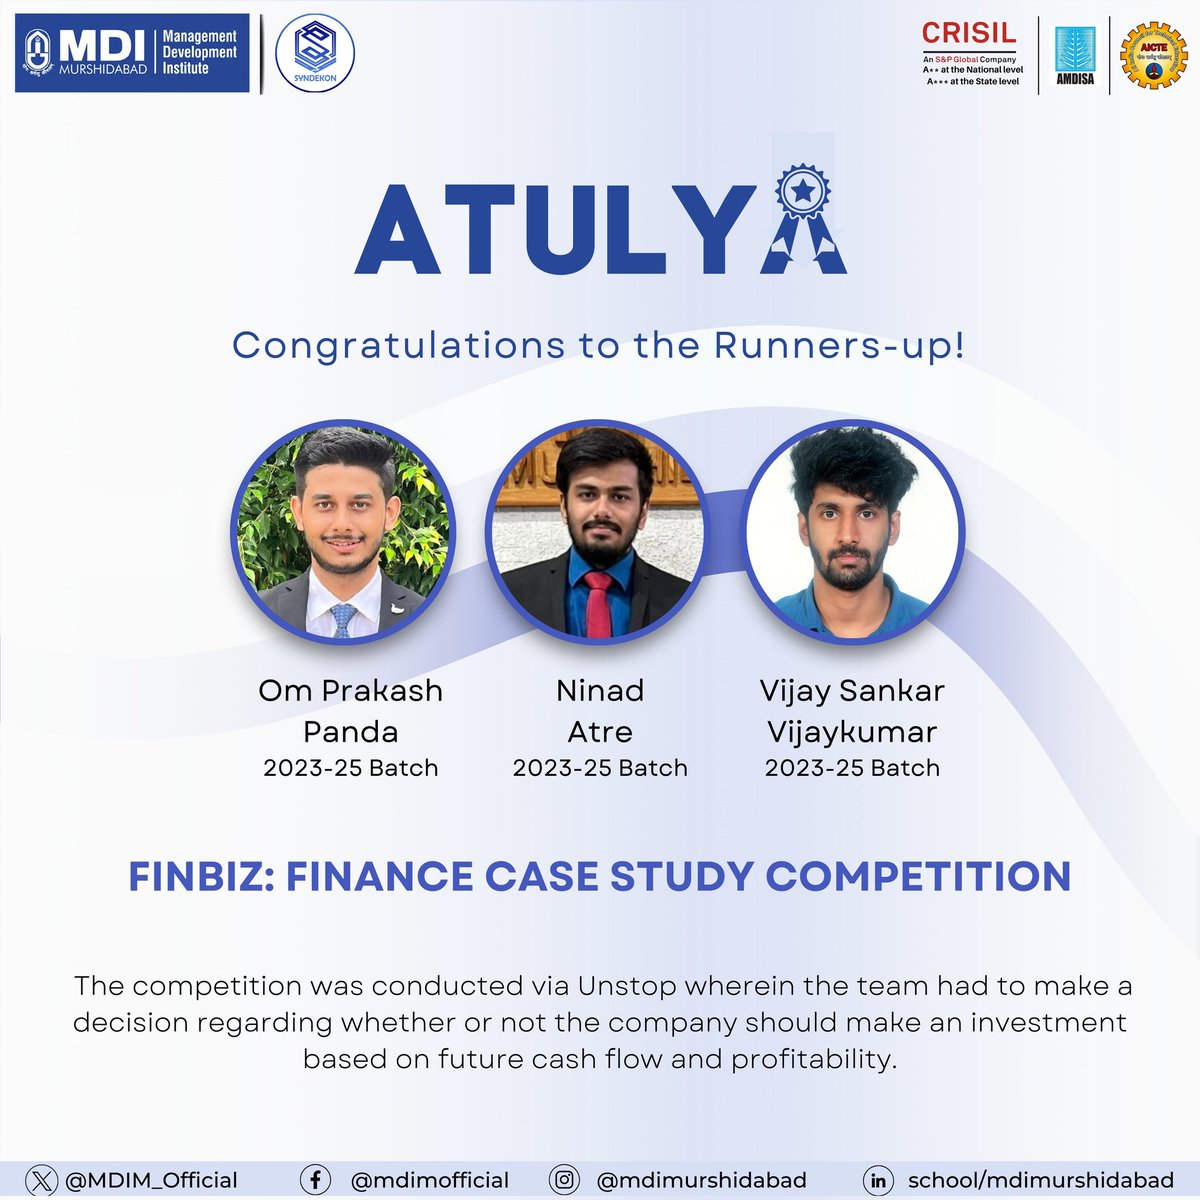 With immense pride, #MDIM announces that Om Prakash Panda, Ninad Atre & Vijay Sankar Vijaykumar of the 2023-25 batch, have secured the Runners-up position in #FinBiz, a national level finance case study #competition conducted via #Unstop.
#MBA #MDI #Management